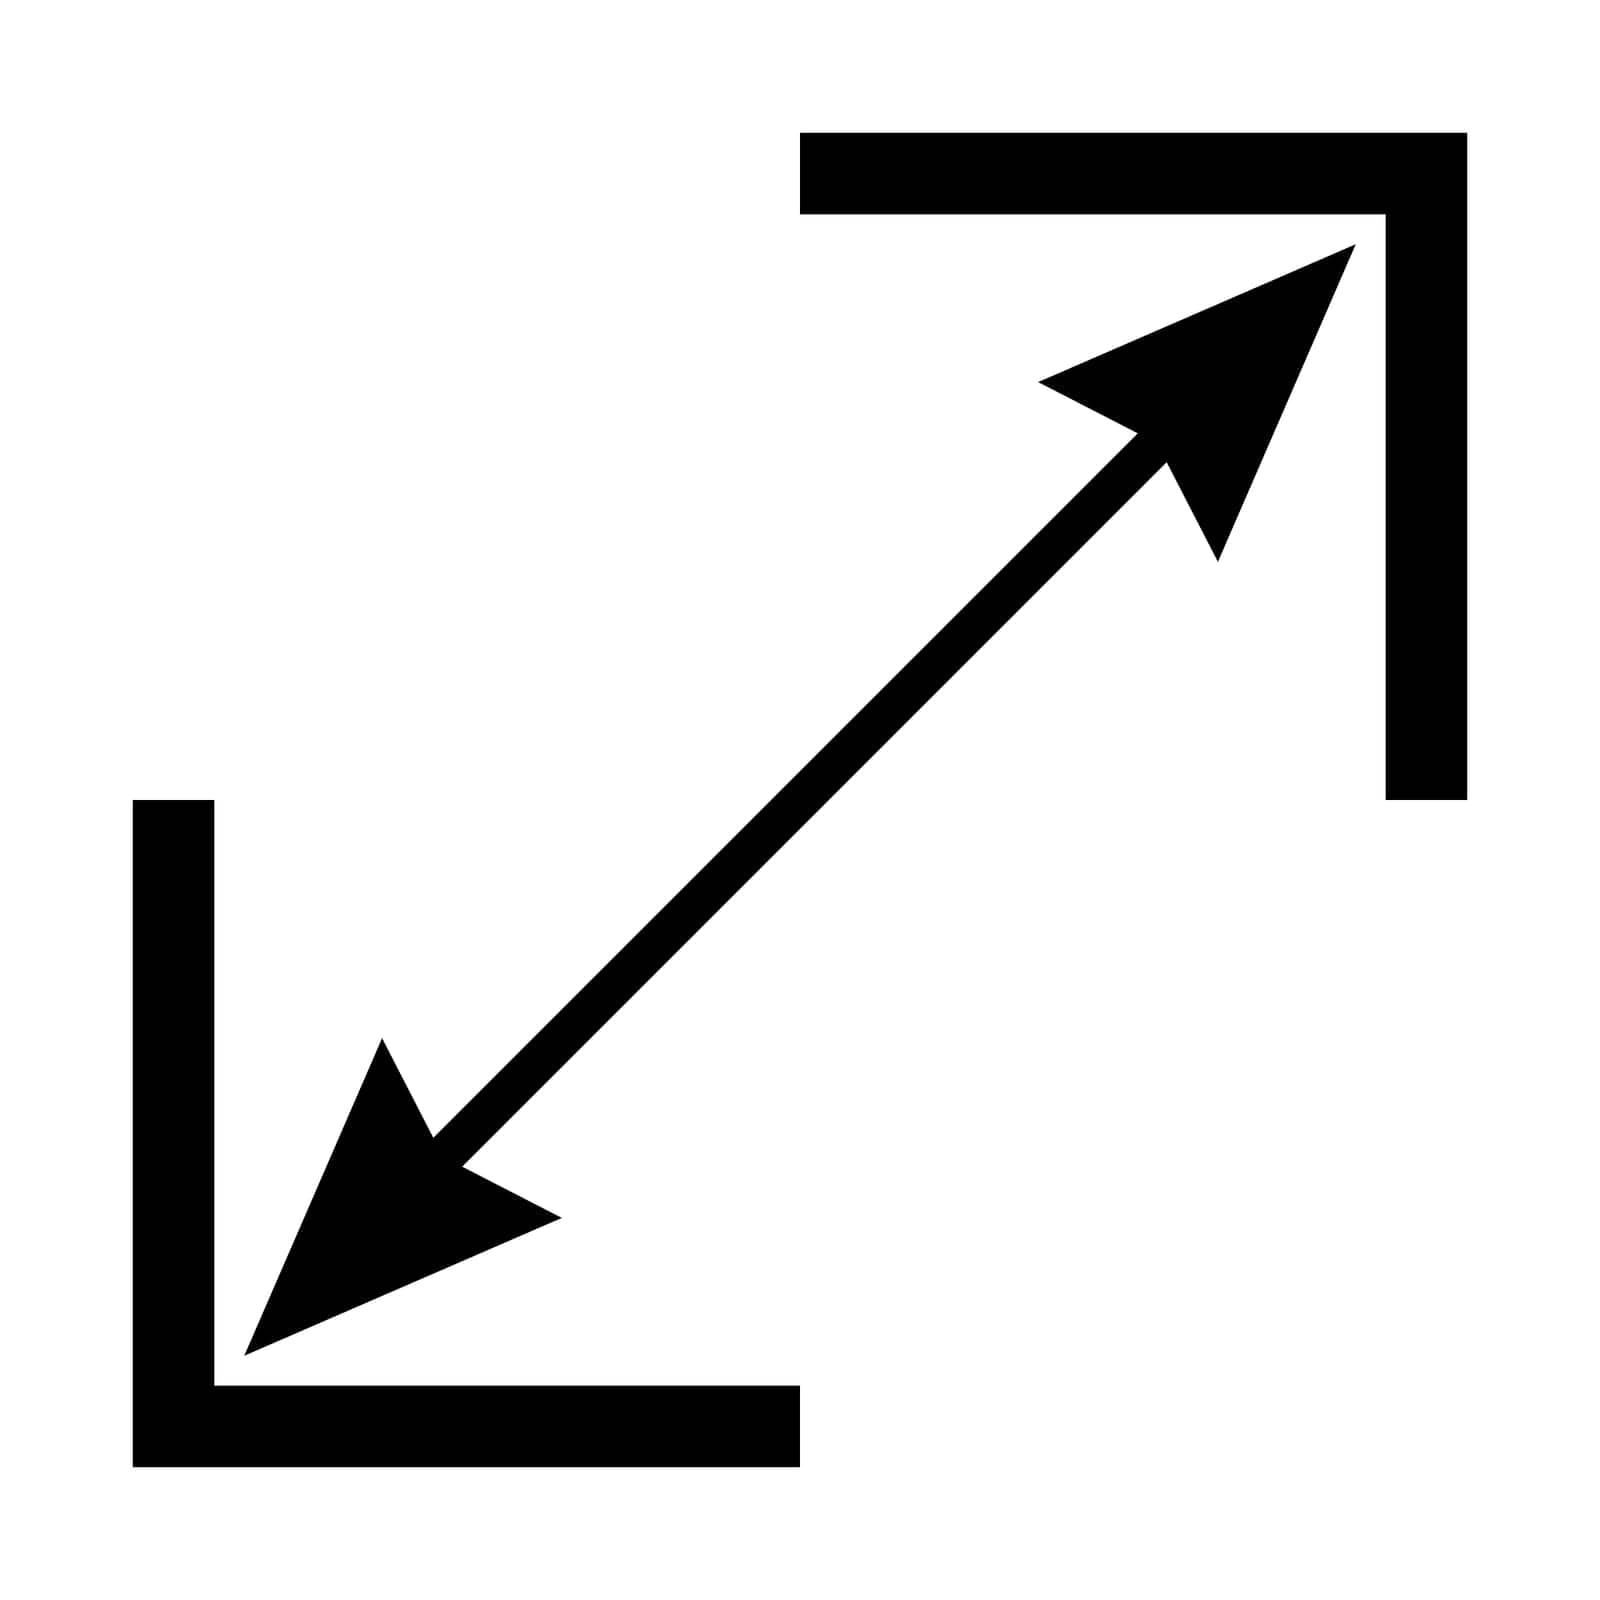 Diagonal icon diagonal line with arrows pointing to corners square